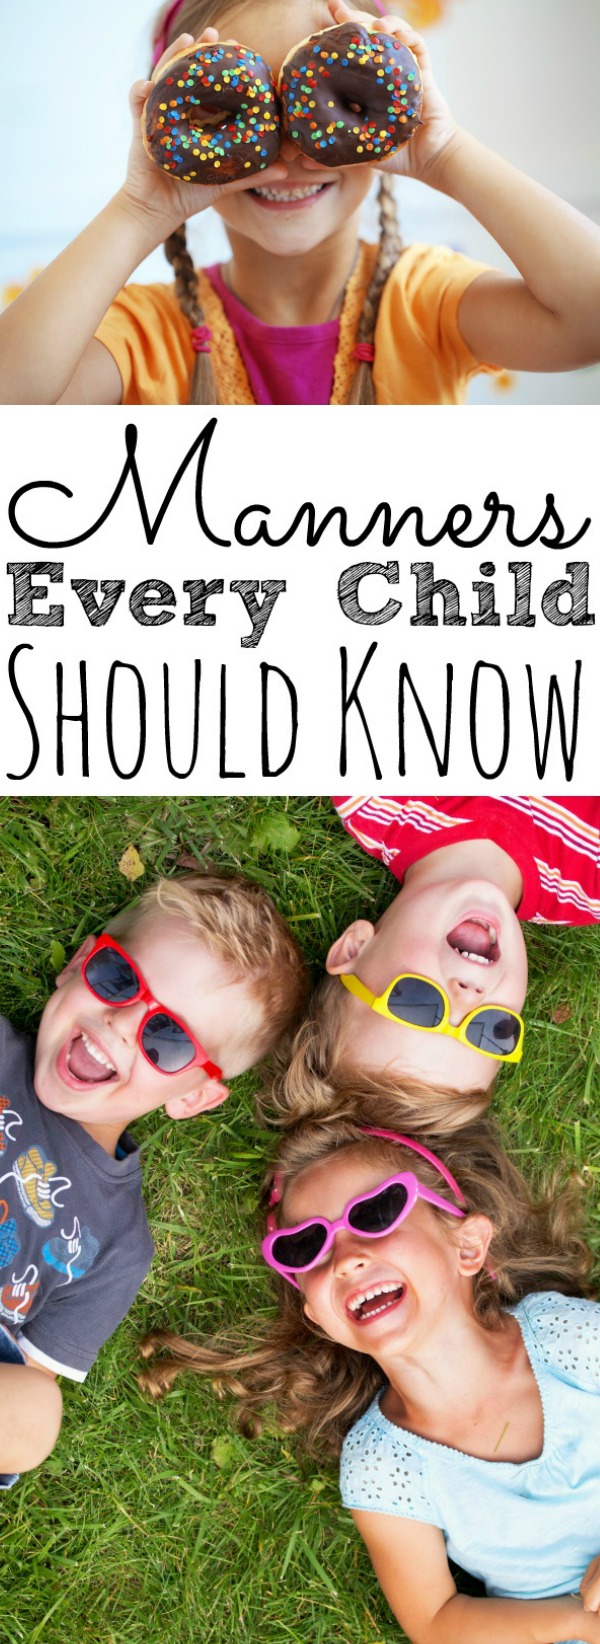 Manners Every Child Should Know